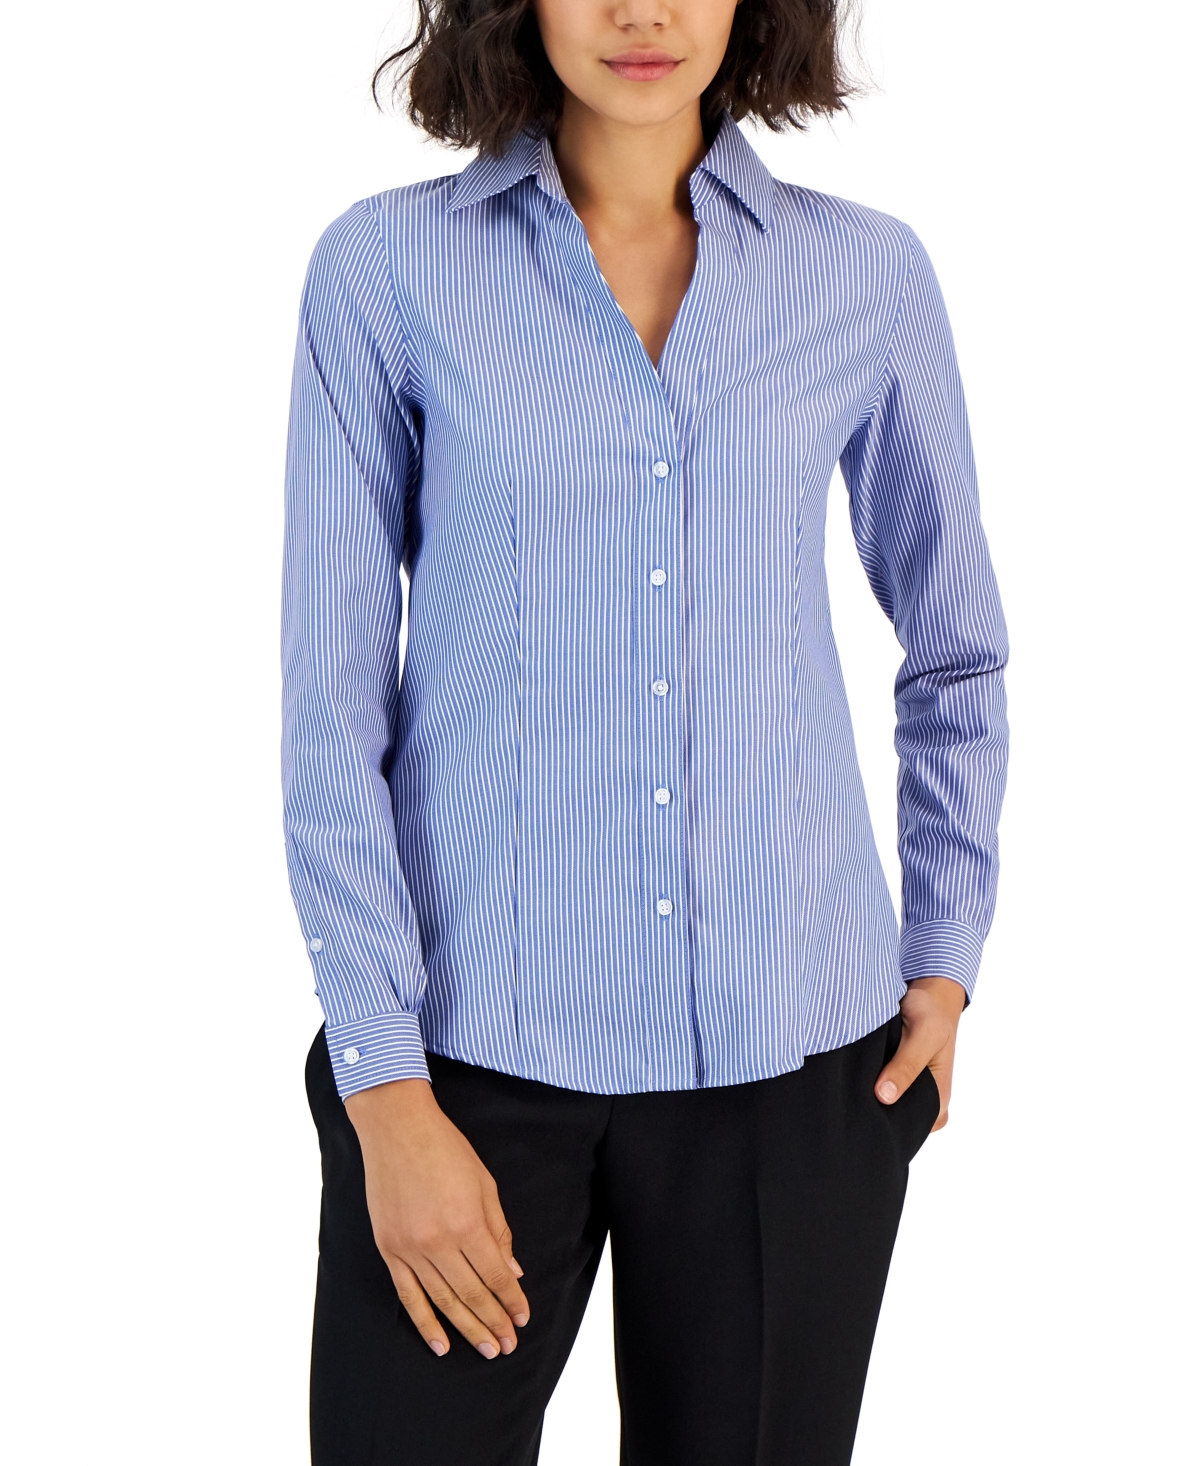 Women's Striped Easy Care Button Up Long Sleeve Blouse - Blue-White